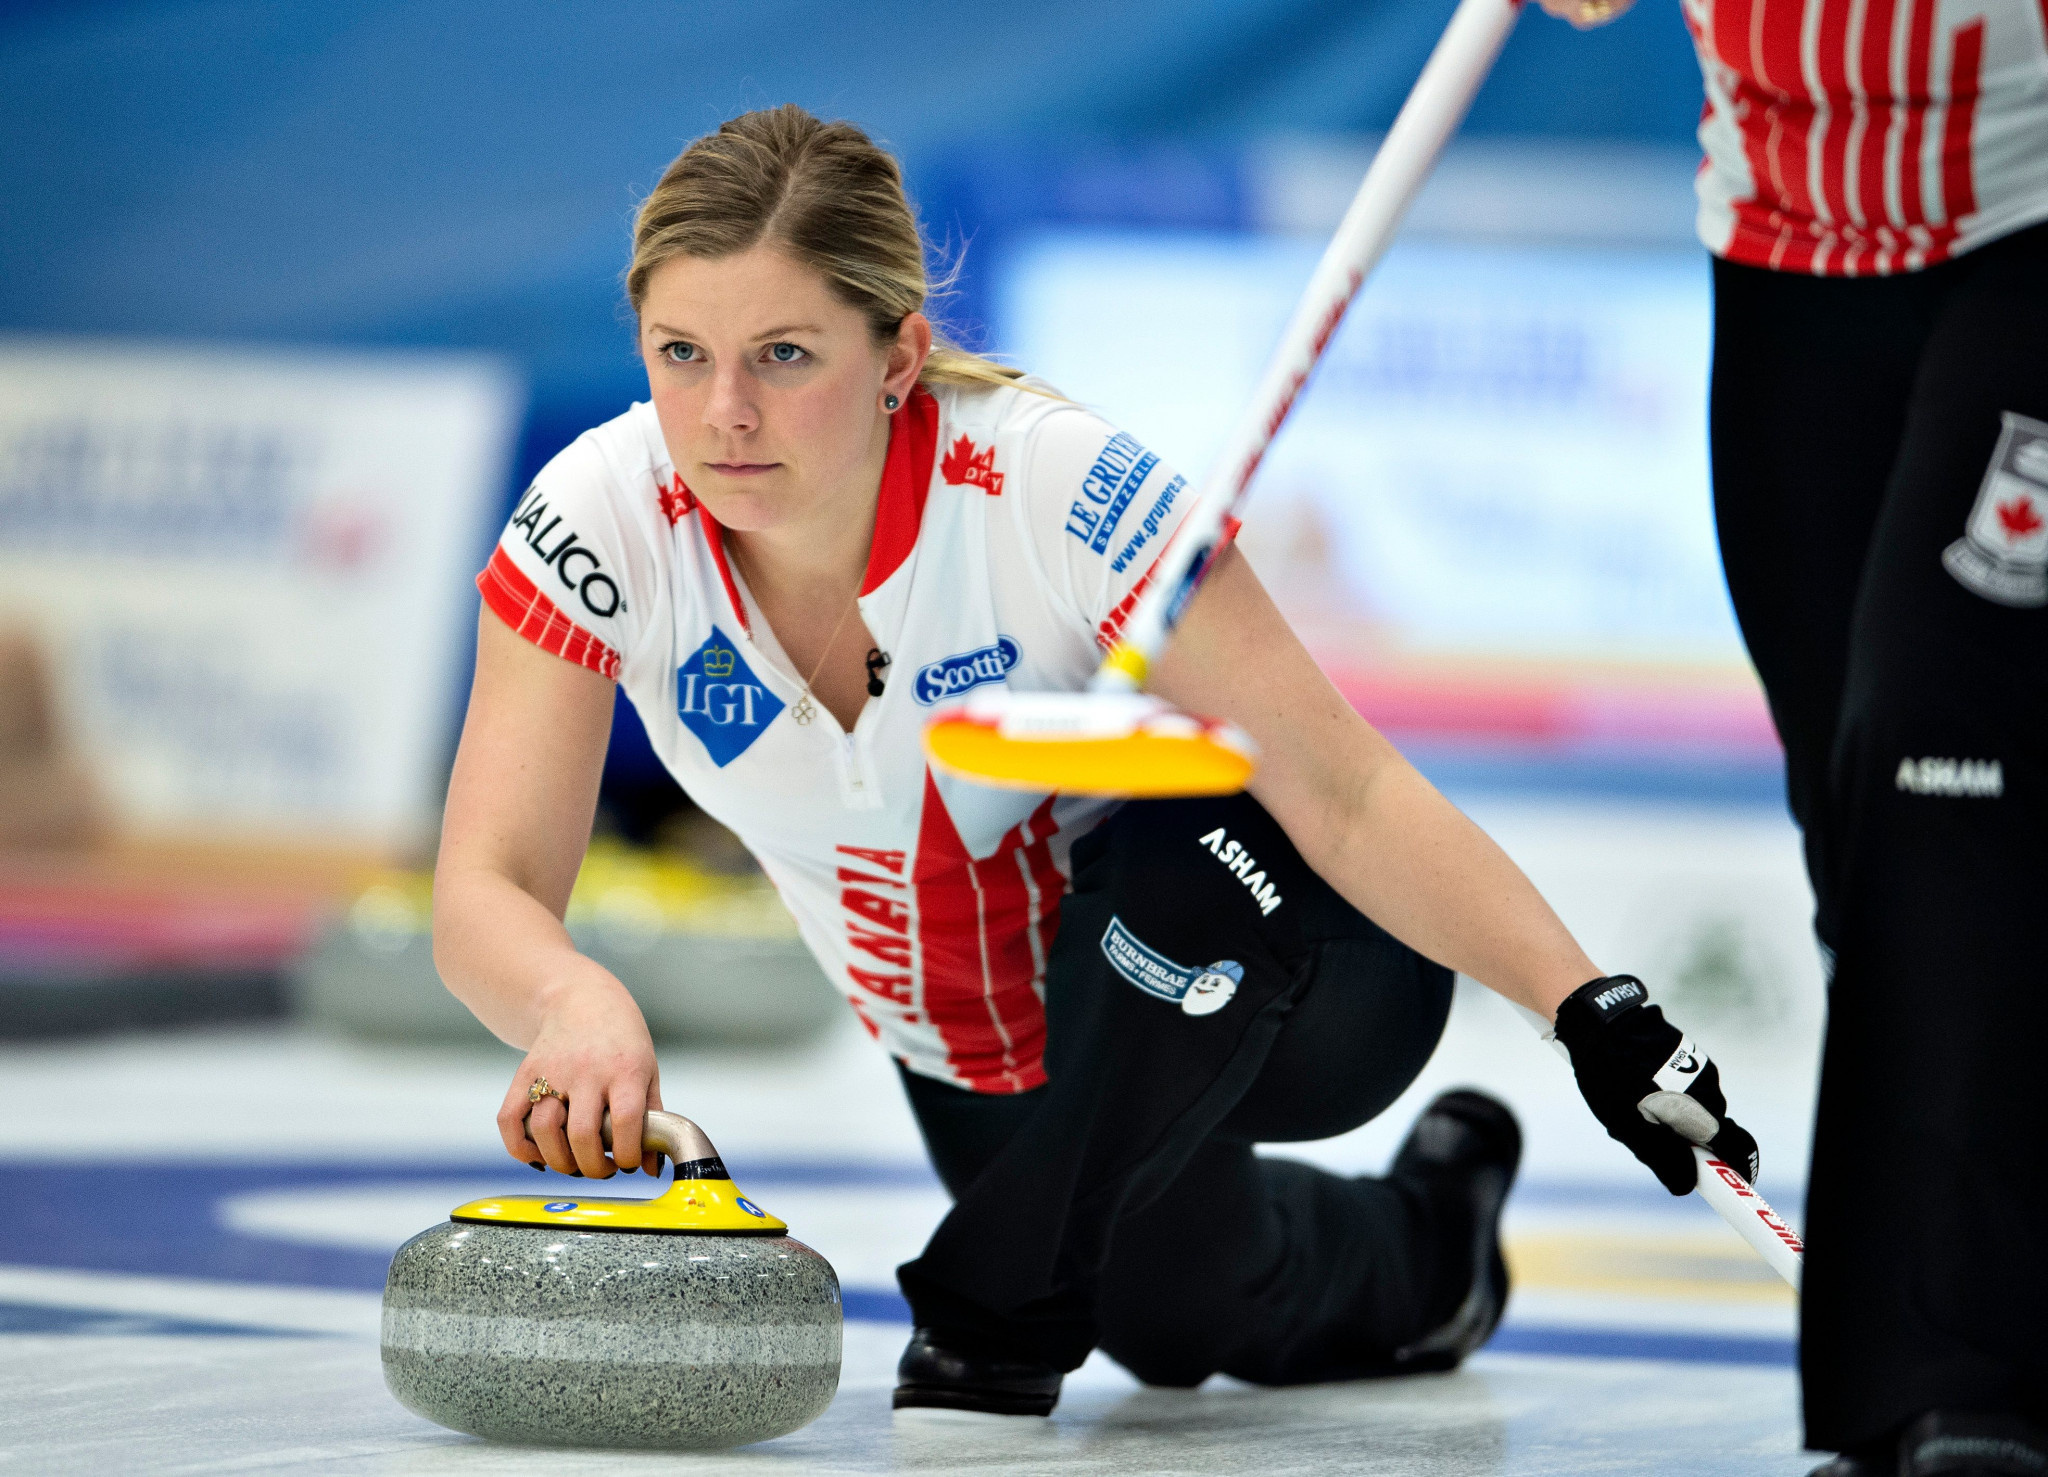 Curling: Sarah Wilkes, A Canadian curler, The World Women’s Curling Championship in Silkeborg, Denmark. 2050x1480 HD Wallpaper.